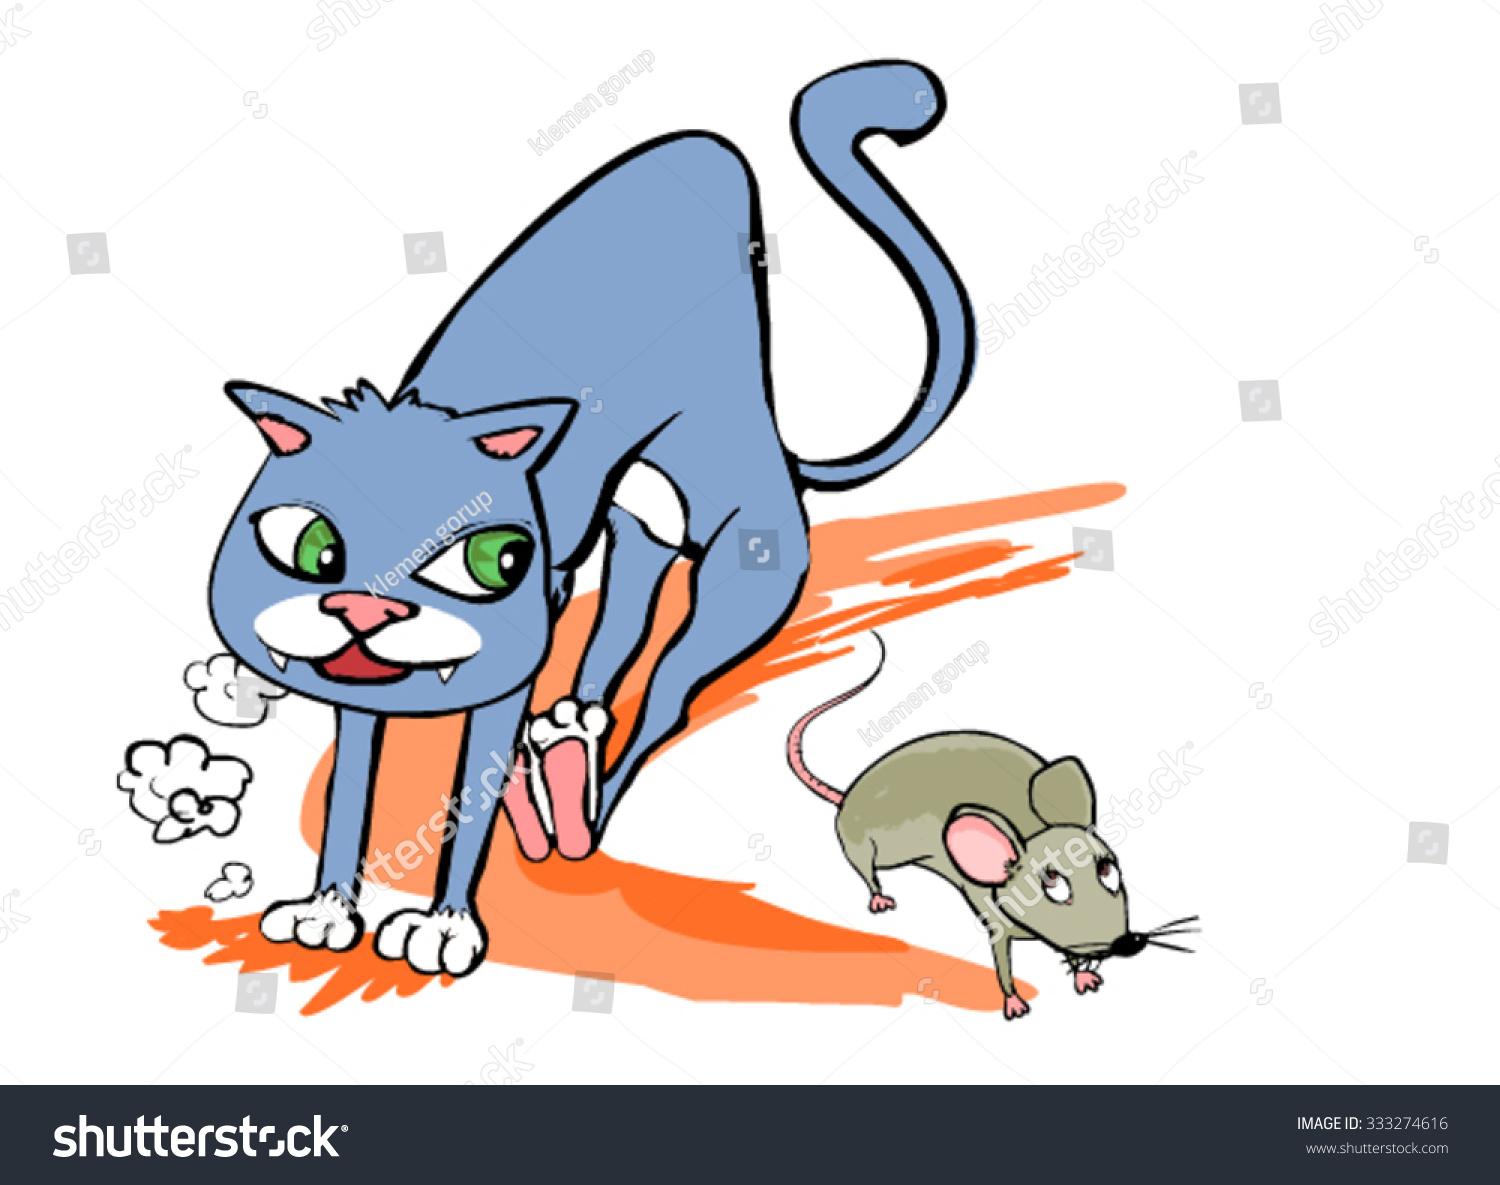 clipart cat and mouse - photo #29